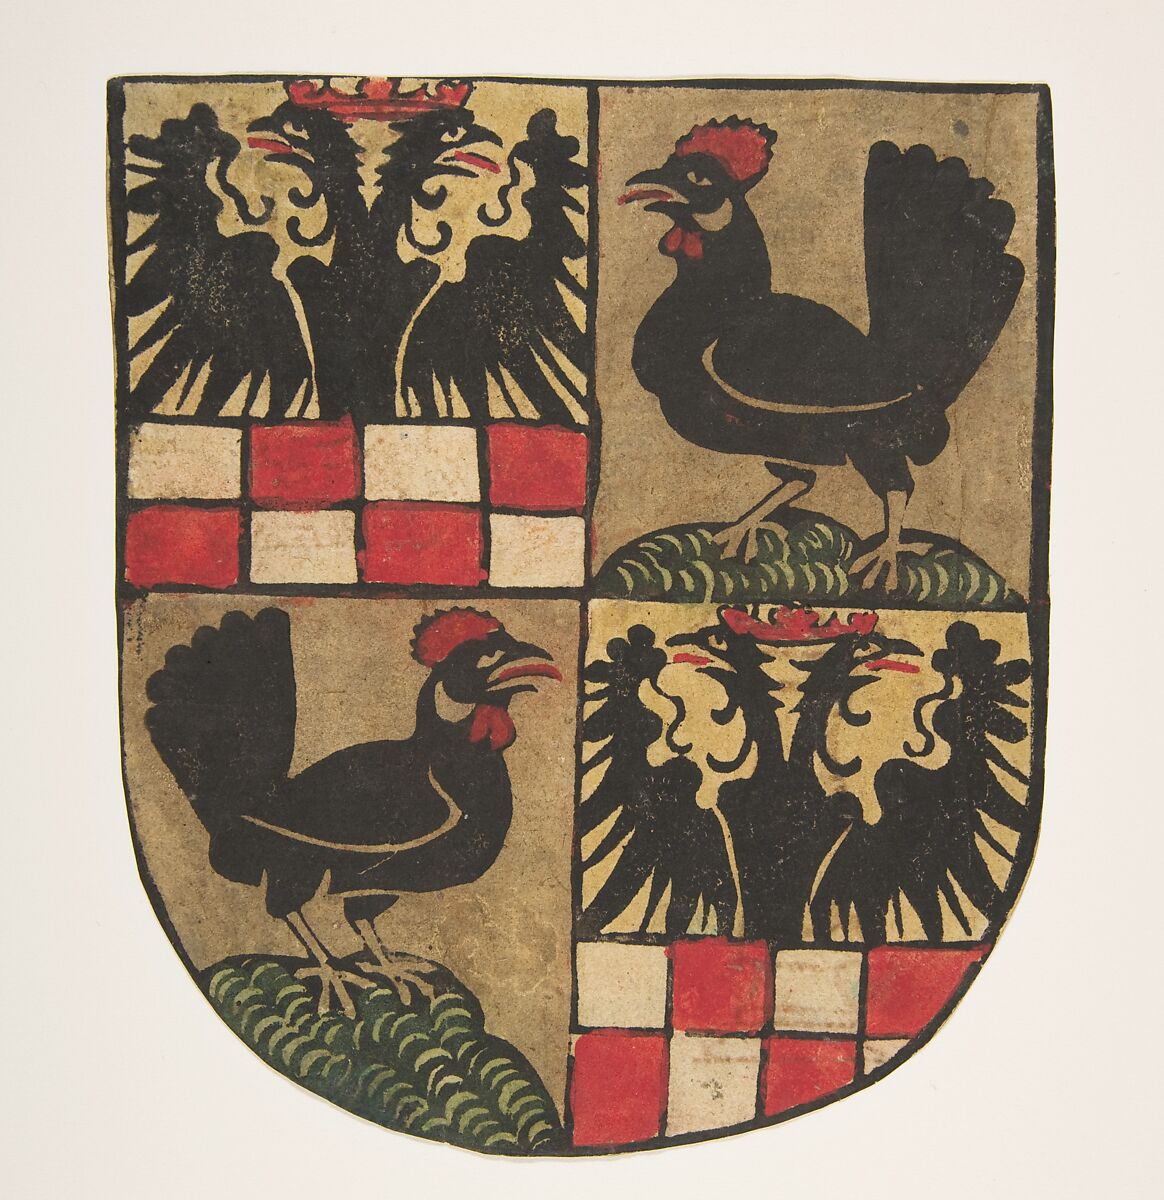 Arms of the Counts of Botenlauben, Anonymous, German, Thuringia, 15th century, Woodcut, colored by stencil 